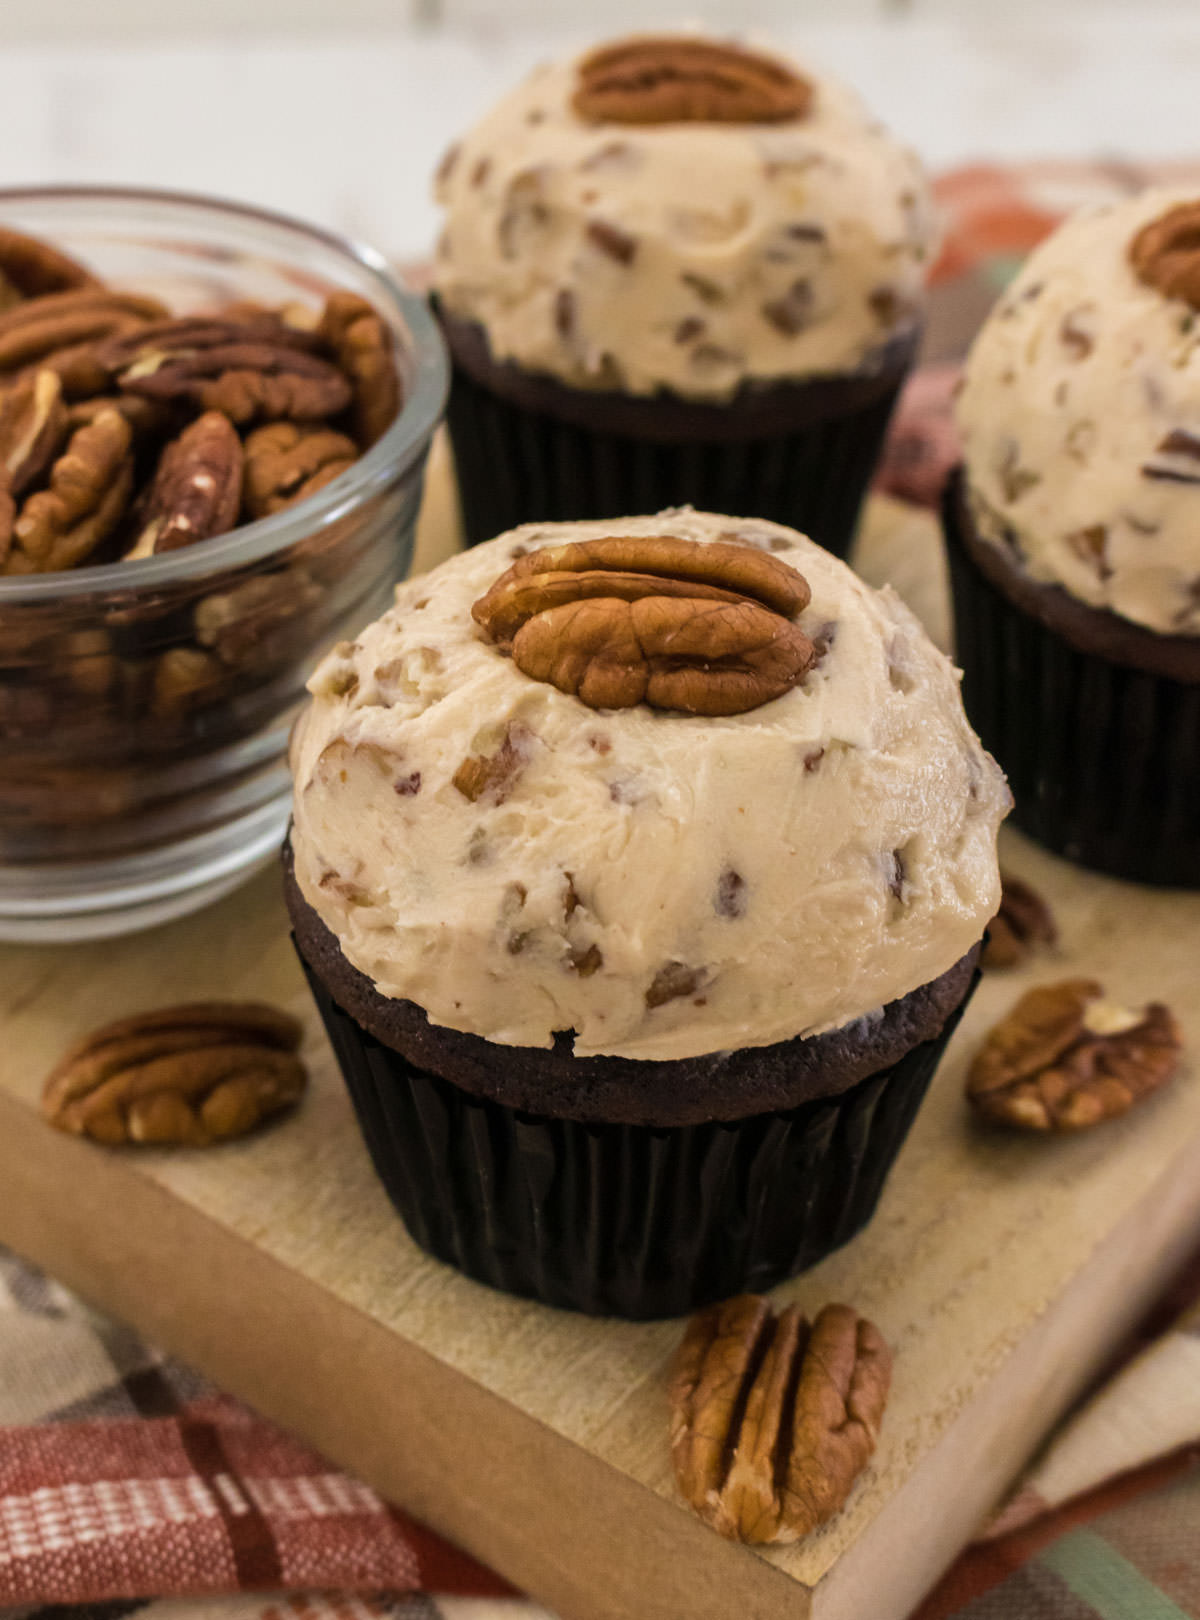 Closeup on three chocolate cupcakes topped with Maple Pecan Buttercream Frosting sitting on a wooden cutting board next to a glass bowl filled with pecans.